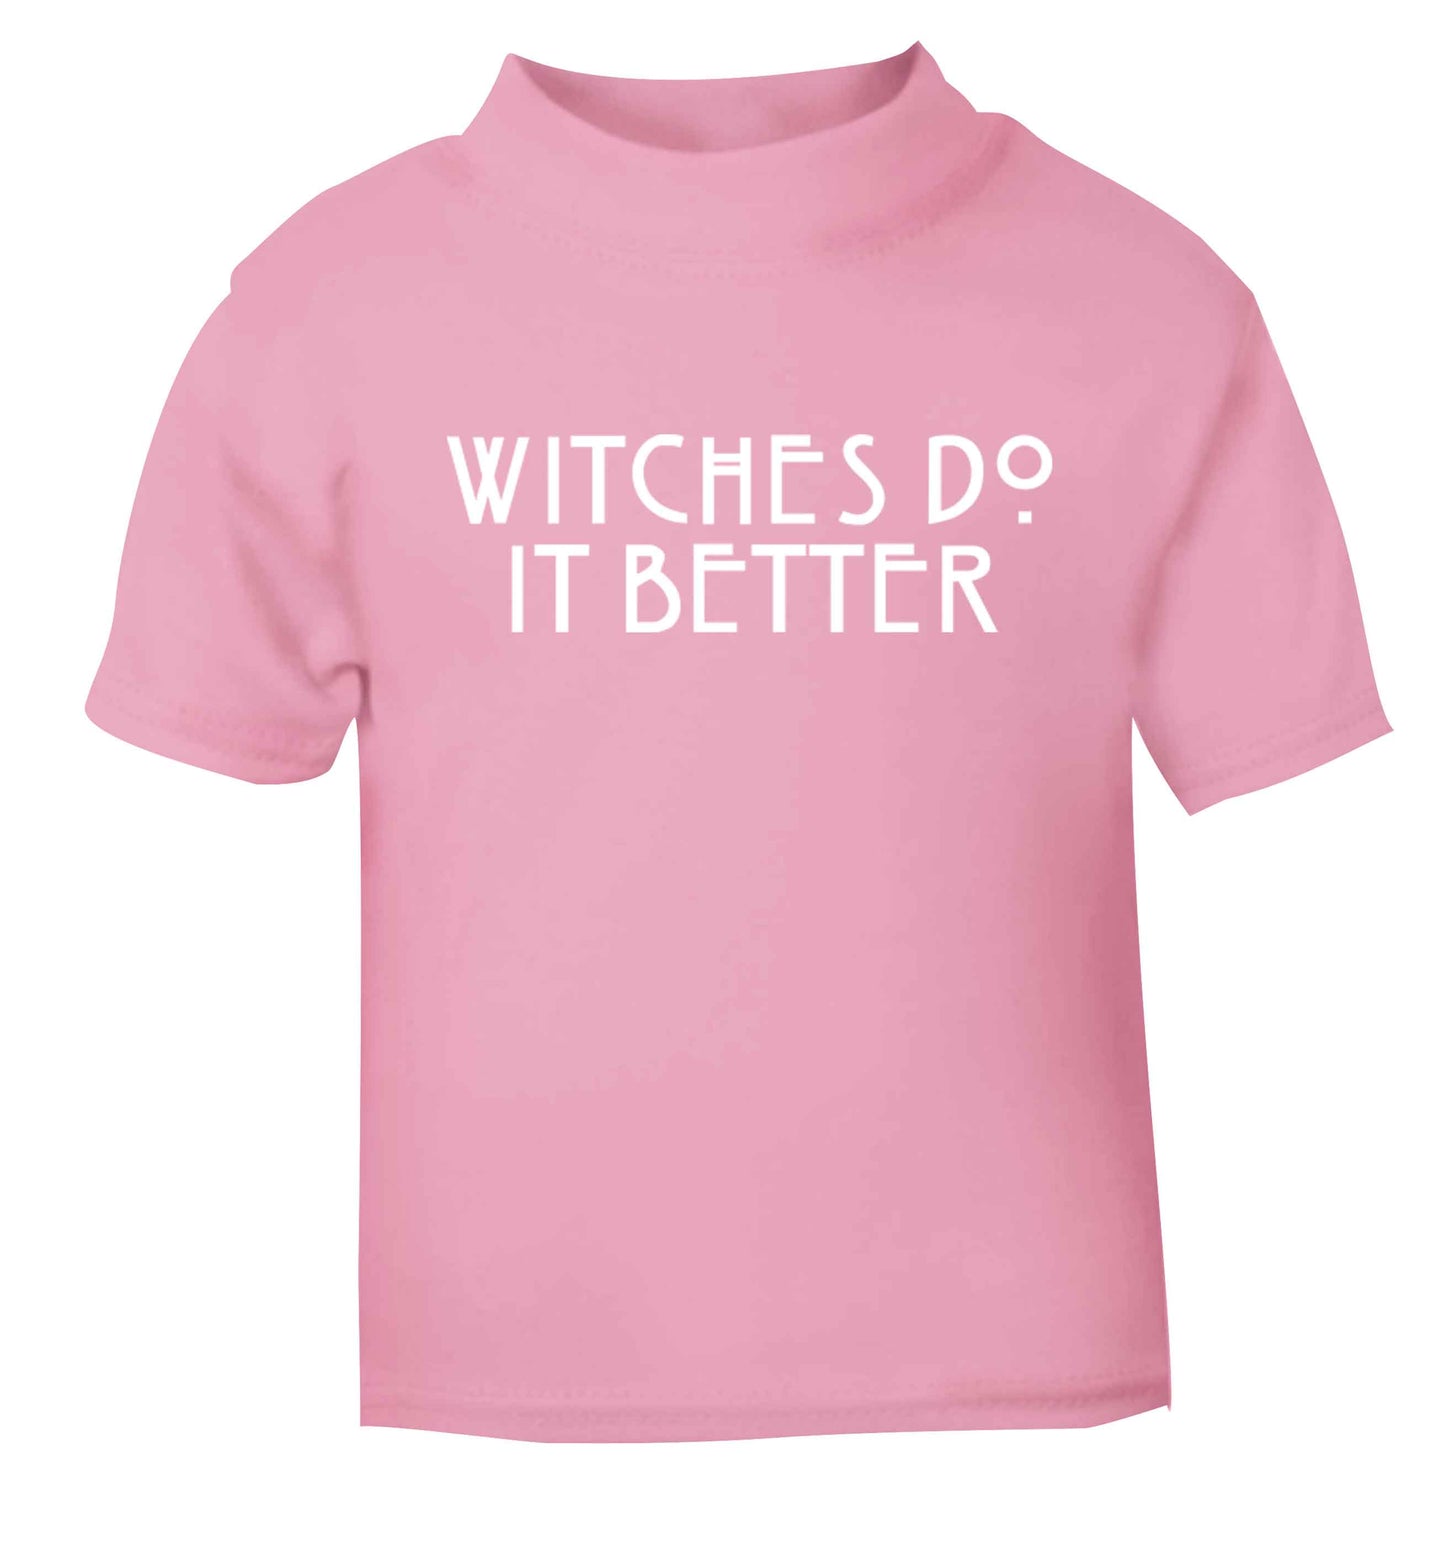 Witches do it better light pink baby toddler Tshirt 2 Years